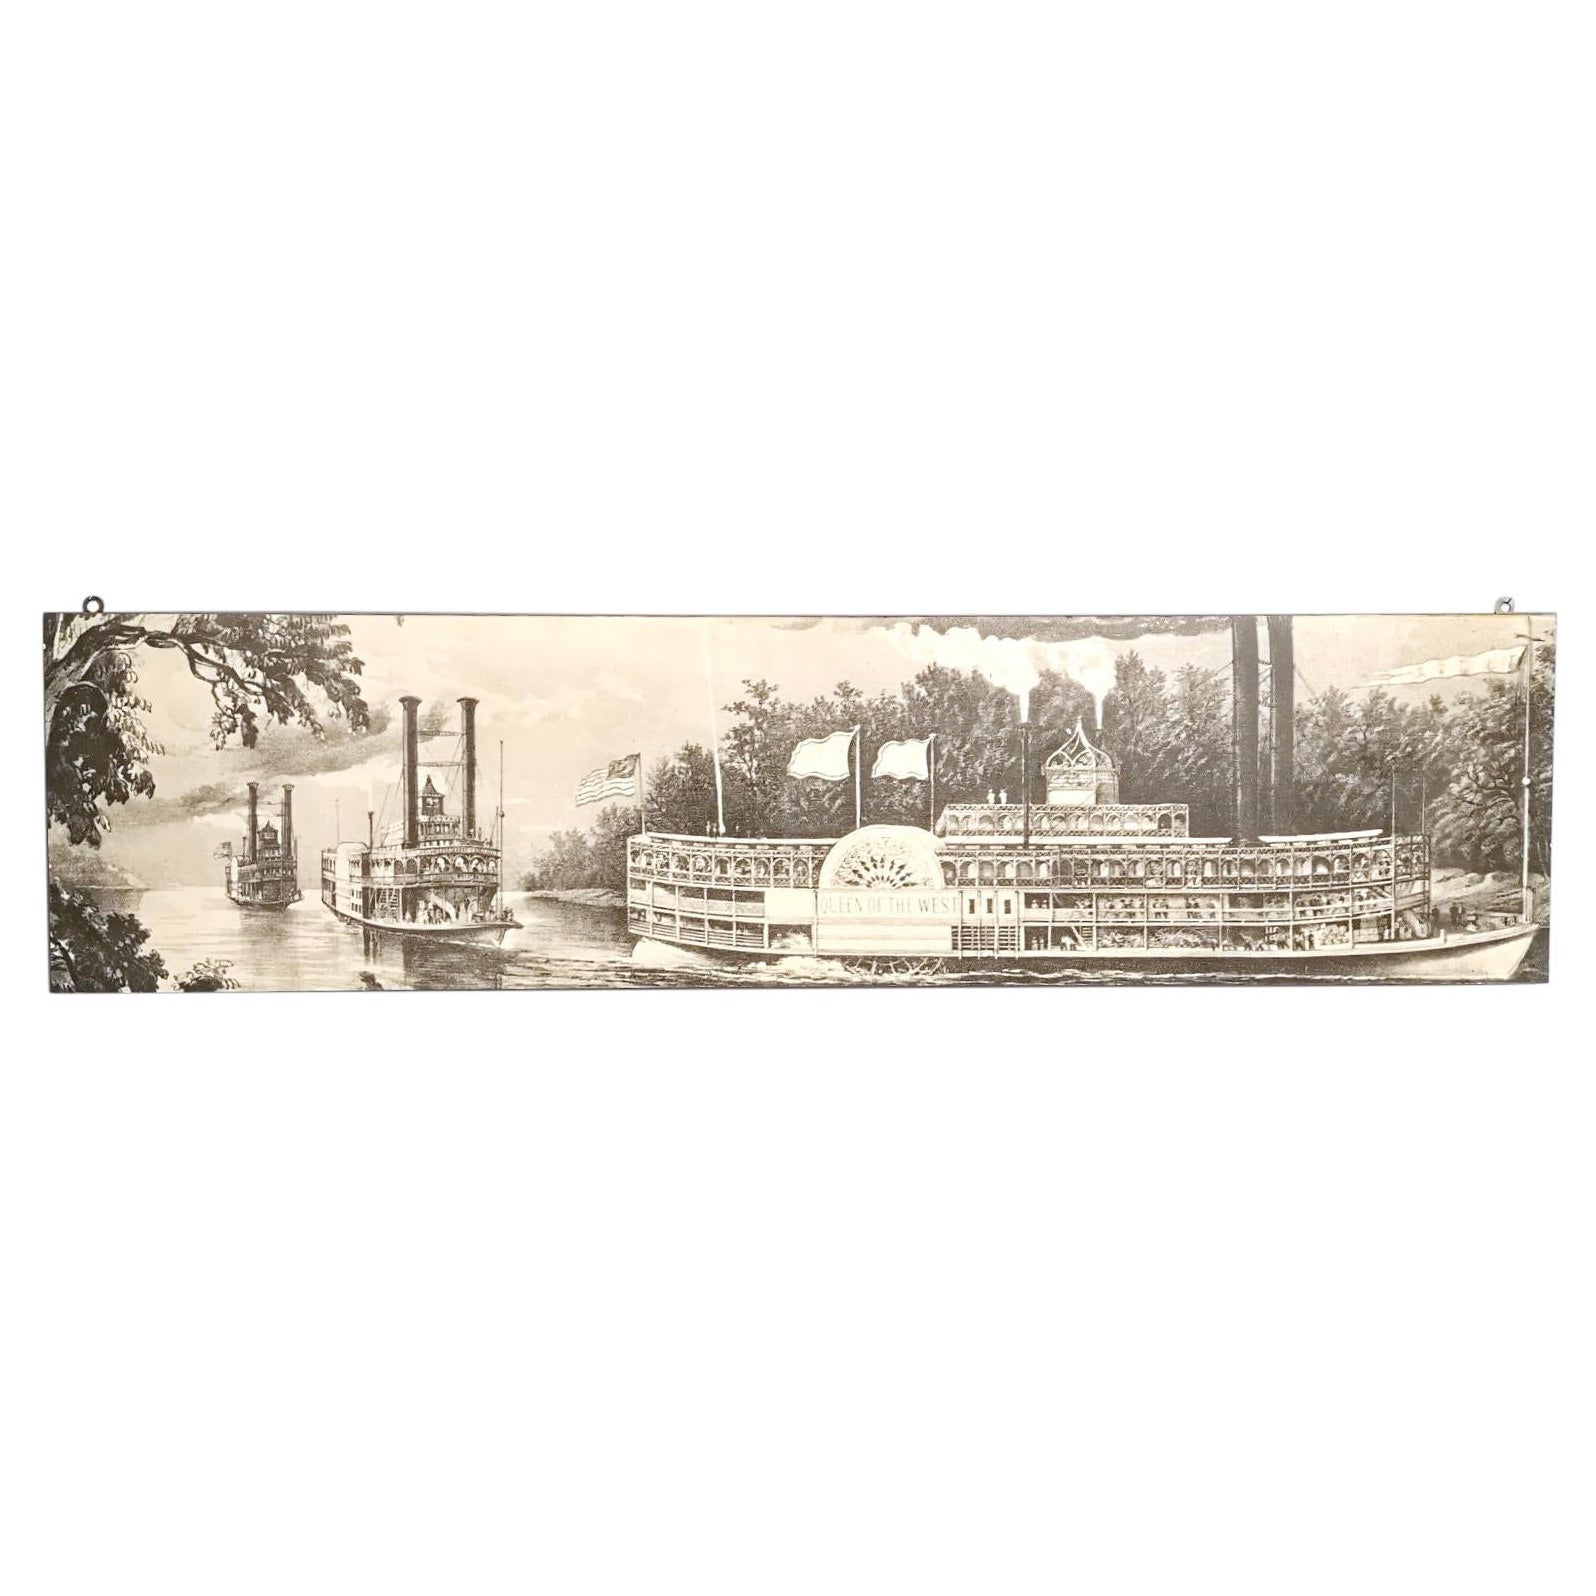 Vintage Decorative Panel with an American Scene on a Wooden Board